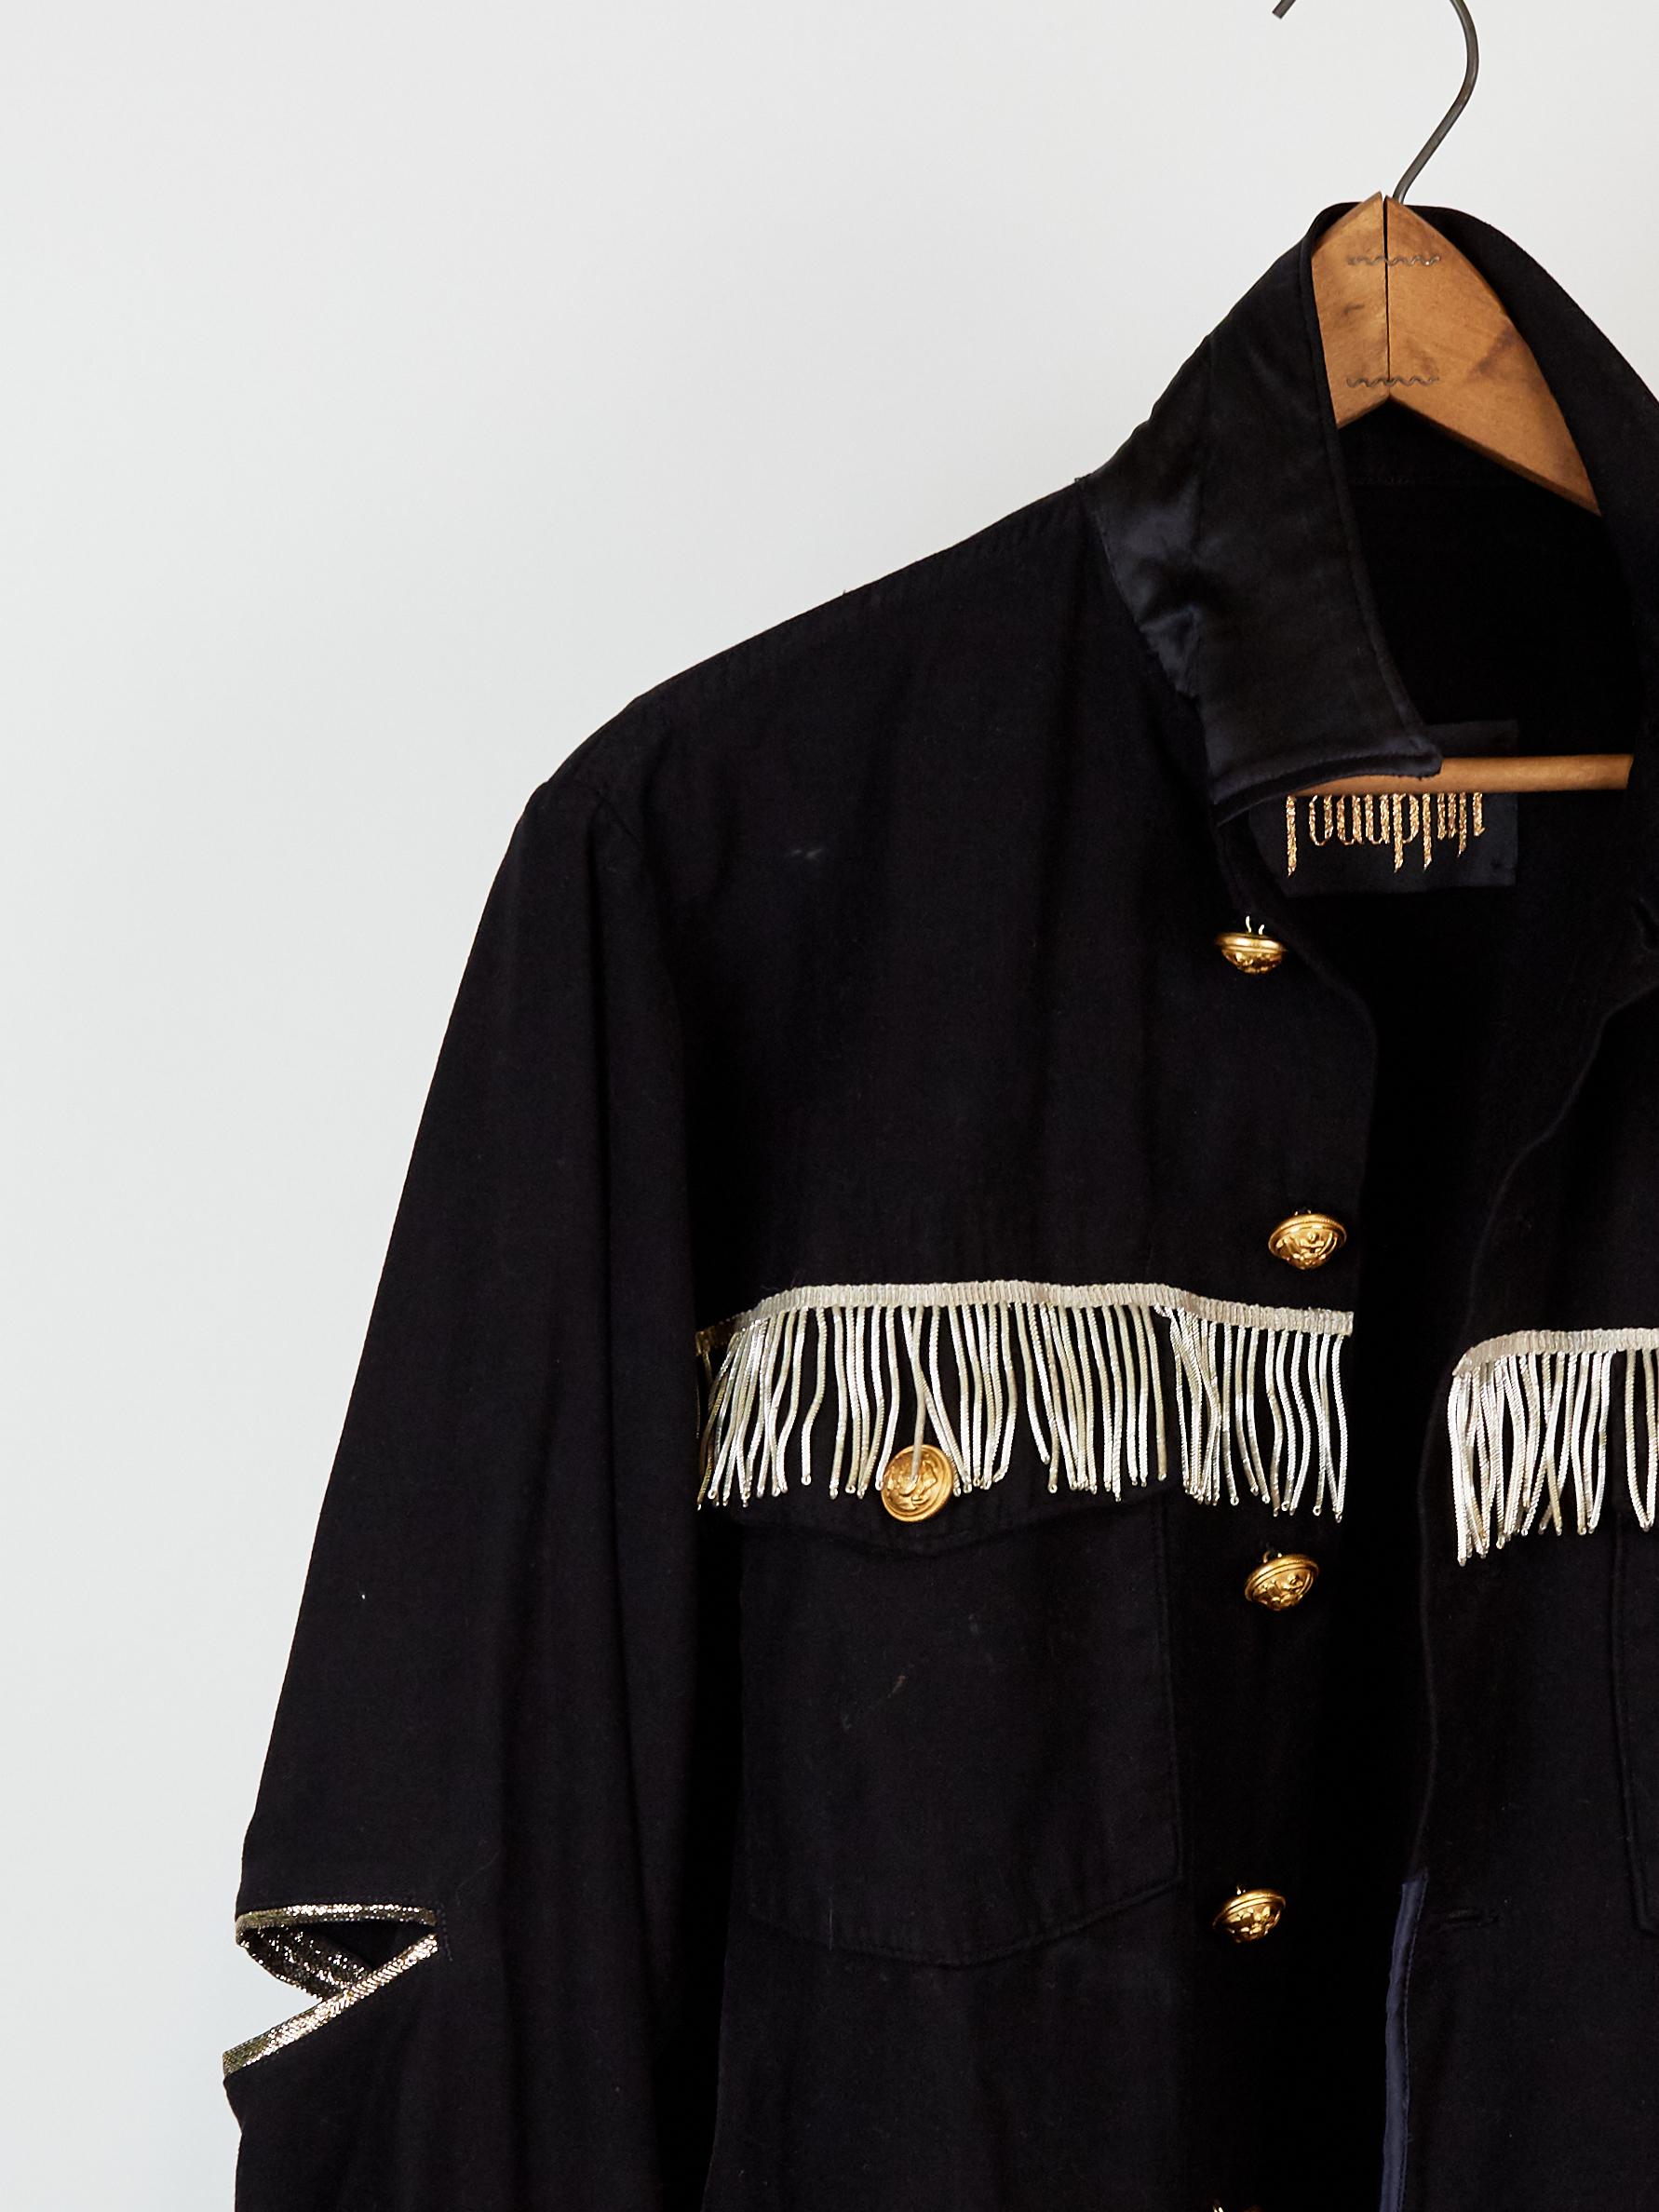 Embellished Repurposed Us Military Jacket from the 70's in 100% Cotton dyed in Black, Original Antique French Bullion Silver Fringe and Vintage Gold Tone Buttons in Brass with details of Black Duchesse 100% Silk and French Designer Gold Fabric.